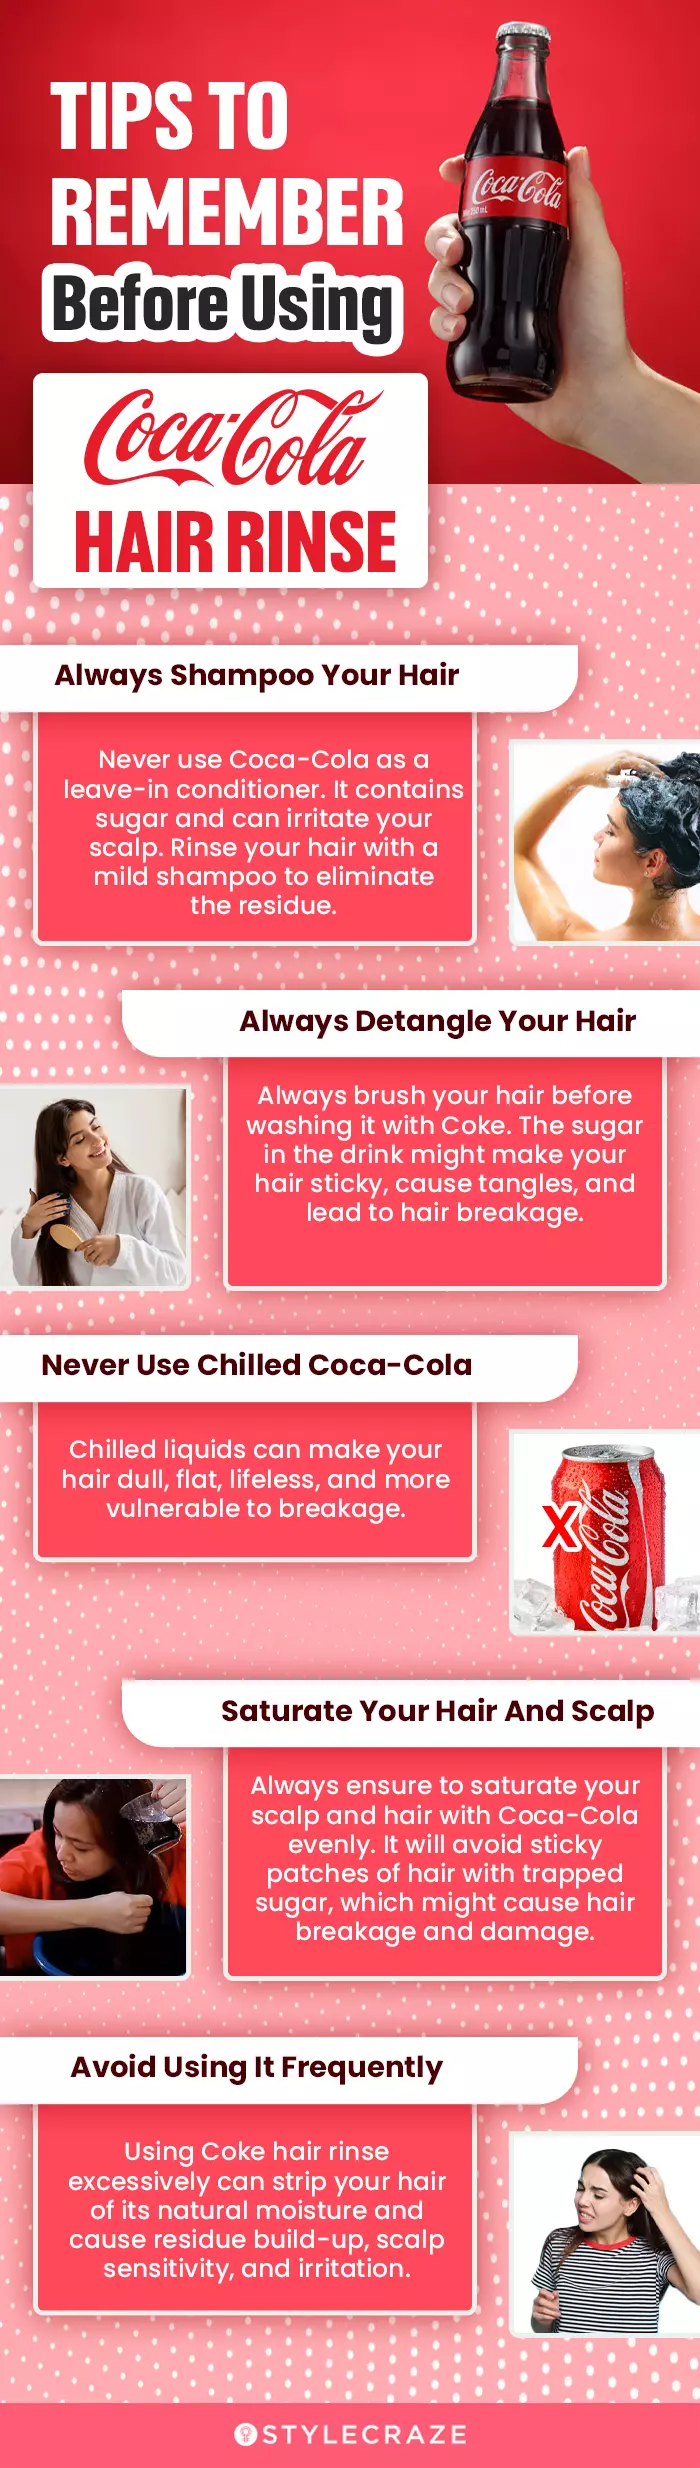 tips to remember before using coca cola hair rinse (infographic)